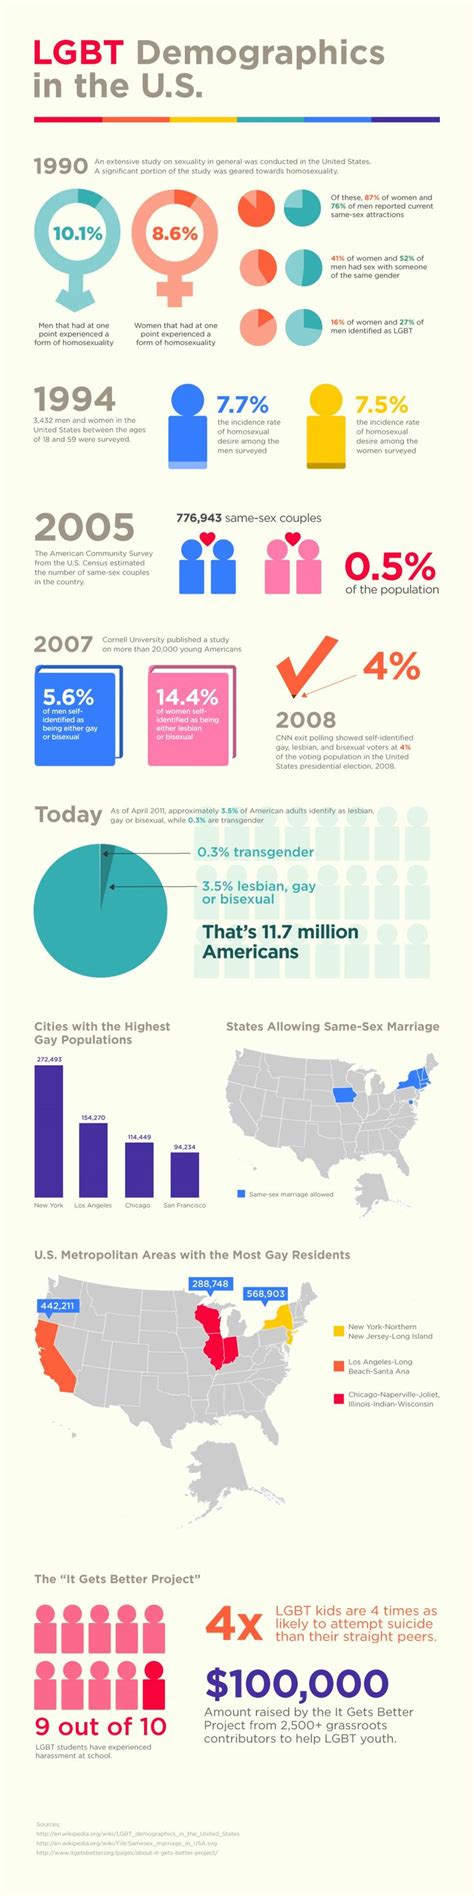 17 Best Images About Lgbt Infographic On Pinterest Romantic Sex Ed And Youth